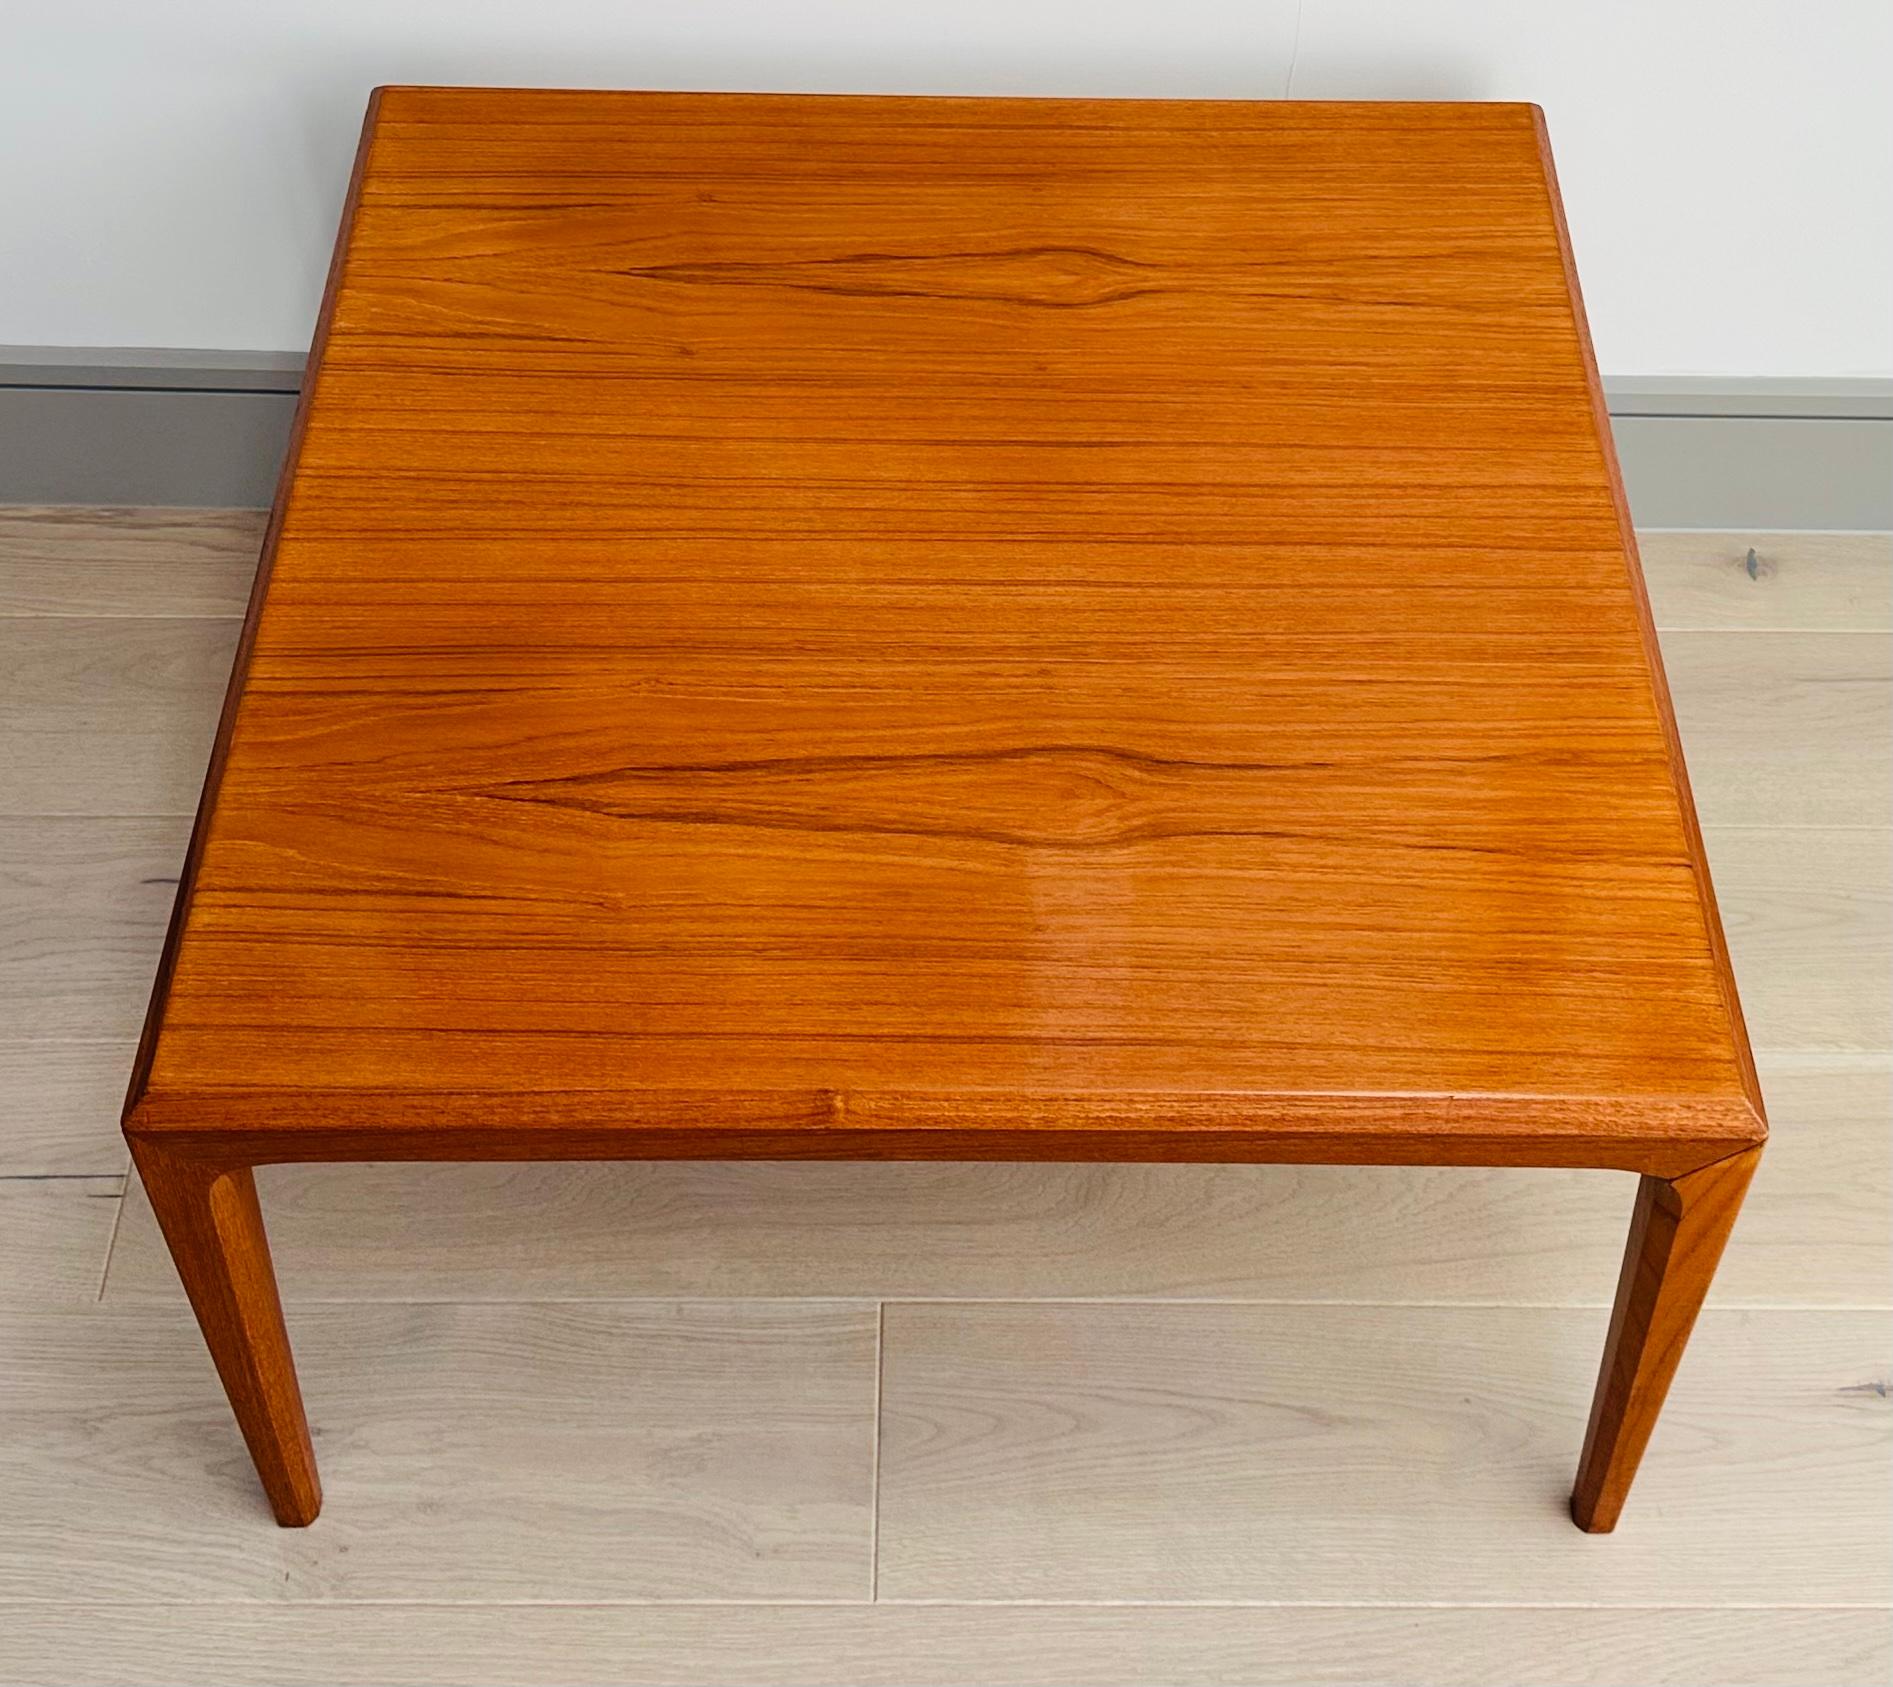 20th Century 1960s Danish Silkeborg Furniture Square Teak Coffee Table by Johannes Andersen For Sale